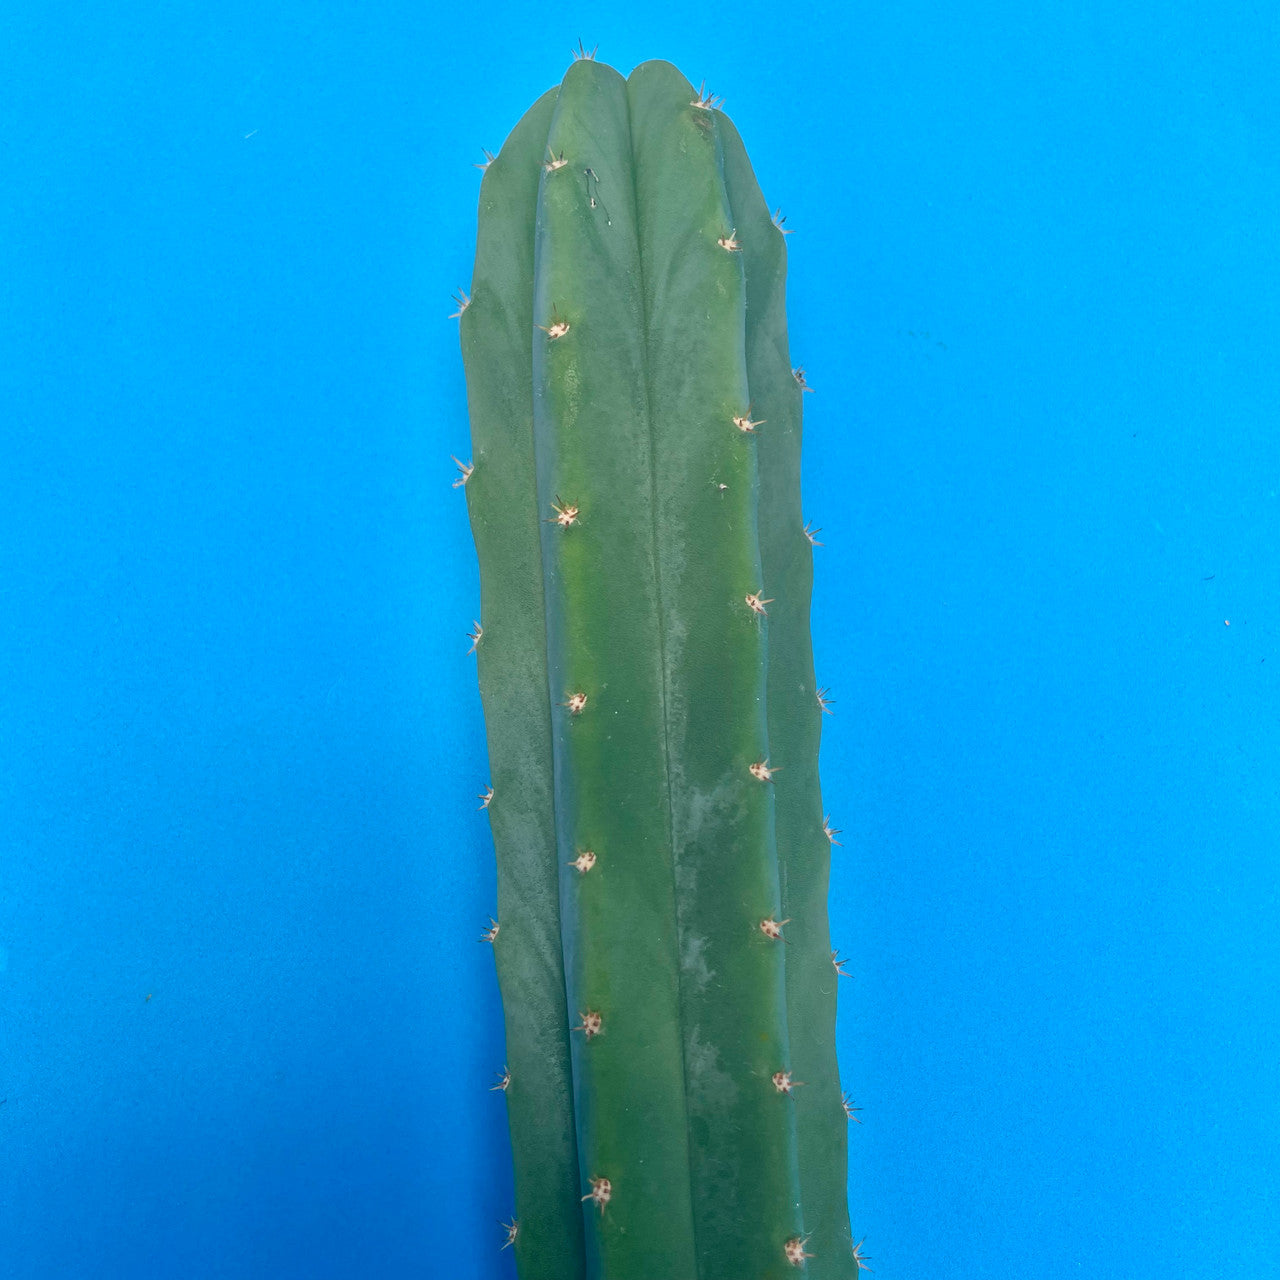 Echinopsis Pachanoi with a blue background